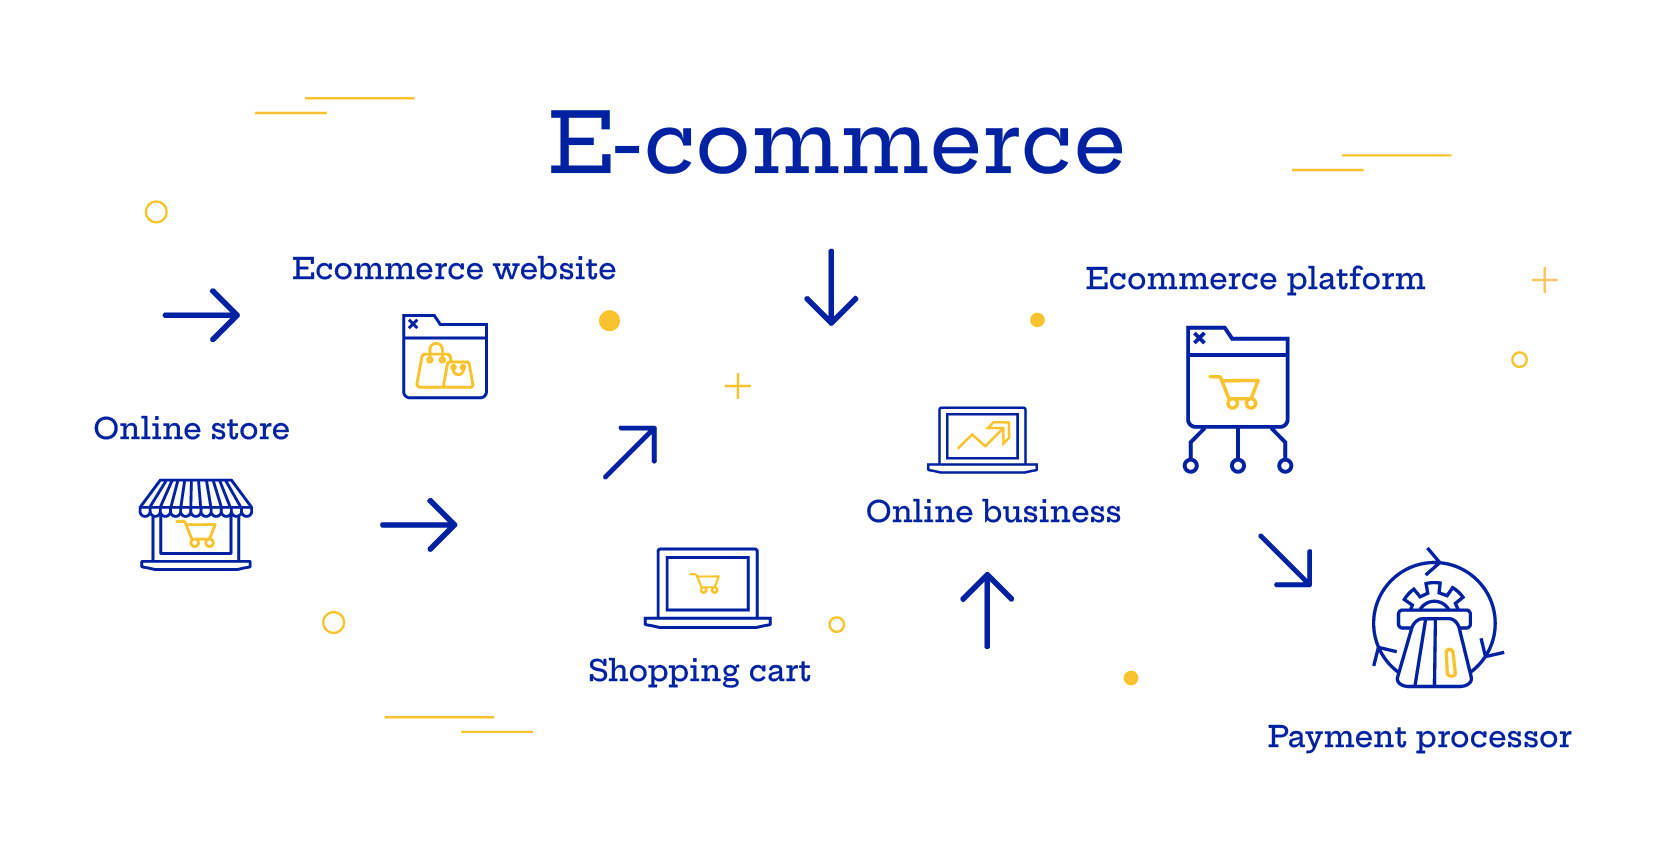 What is the process of e-commerce?